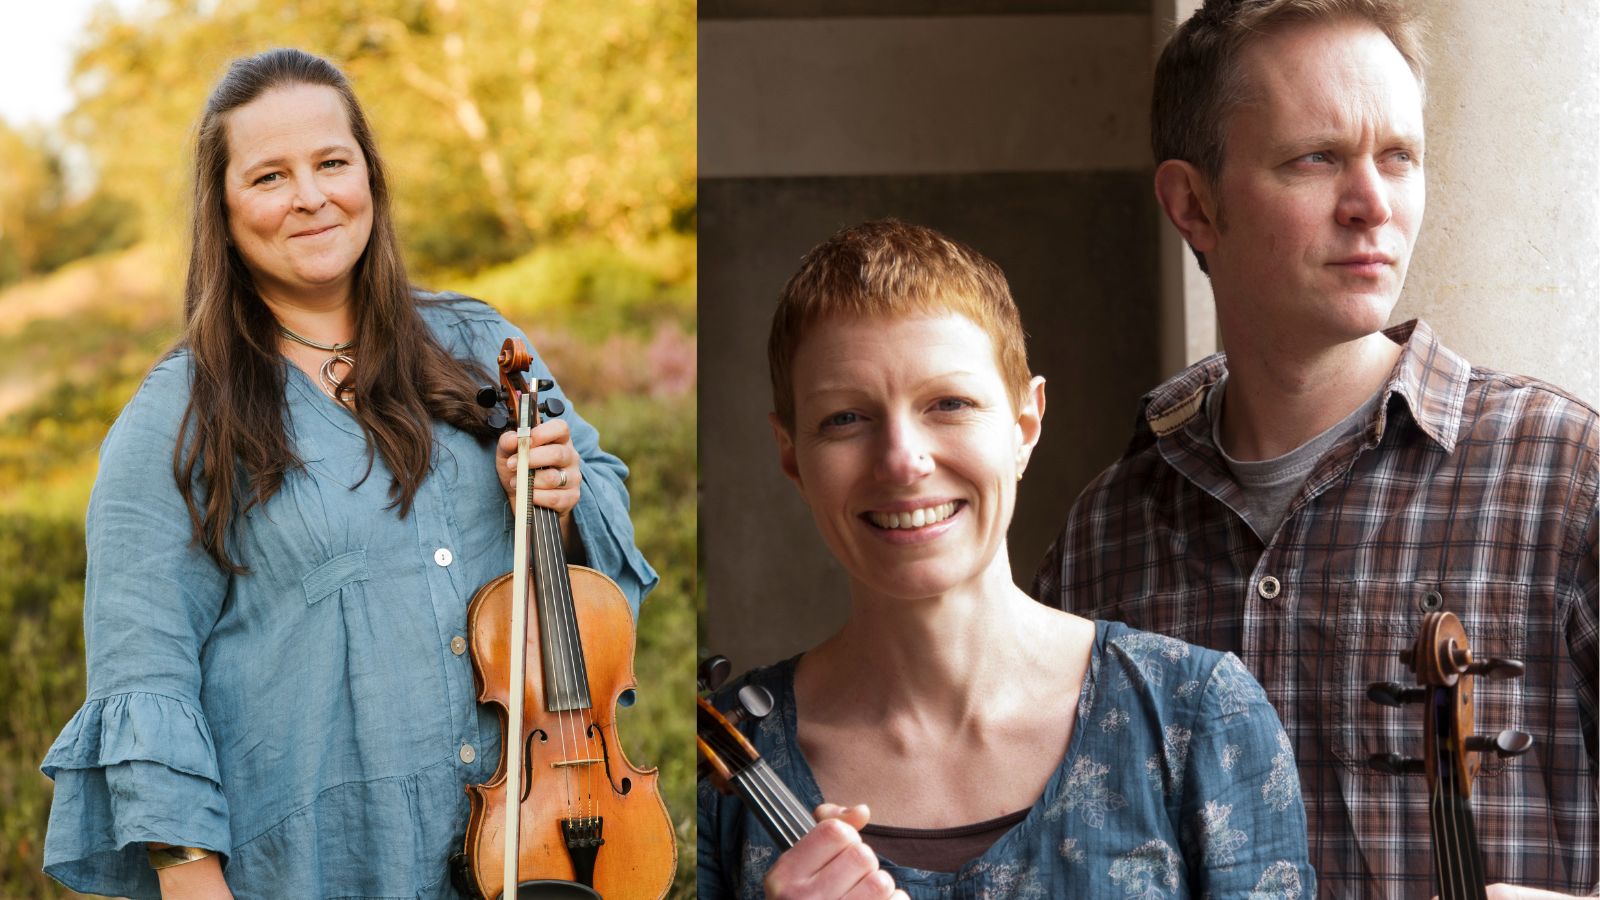 Fiddle players Bryony Griffith standing in nature with her violin. Next to her are musician duo Becki Driscoll and Nick Wyke holding their fiddles. Becki is smiling and Nick is looking into the distance.